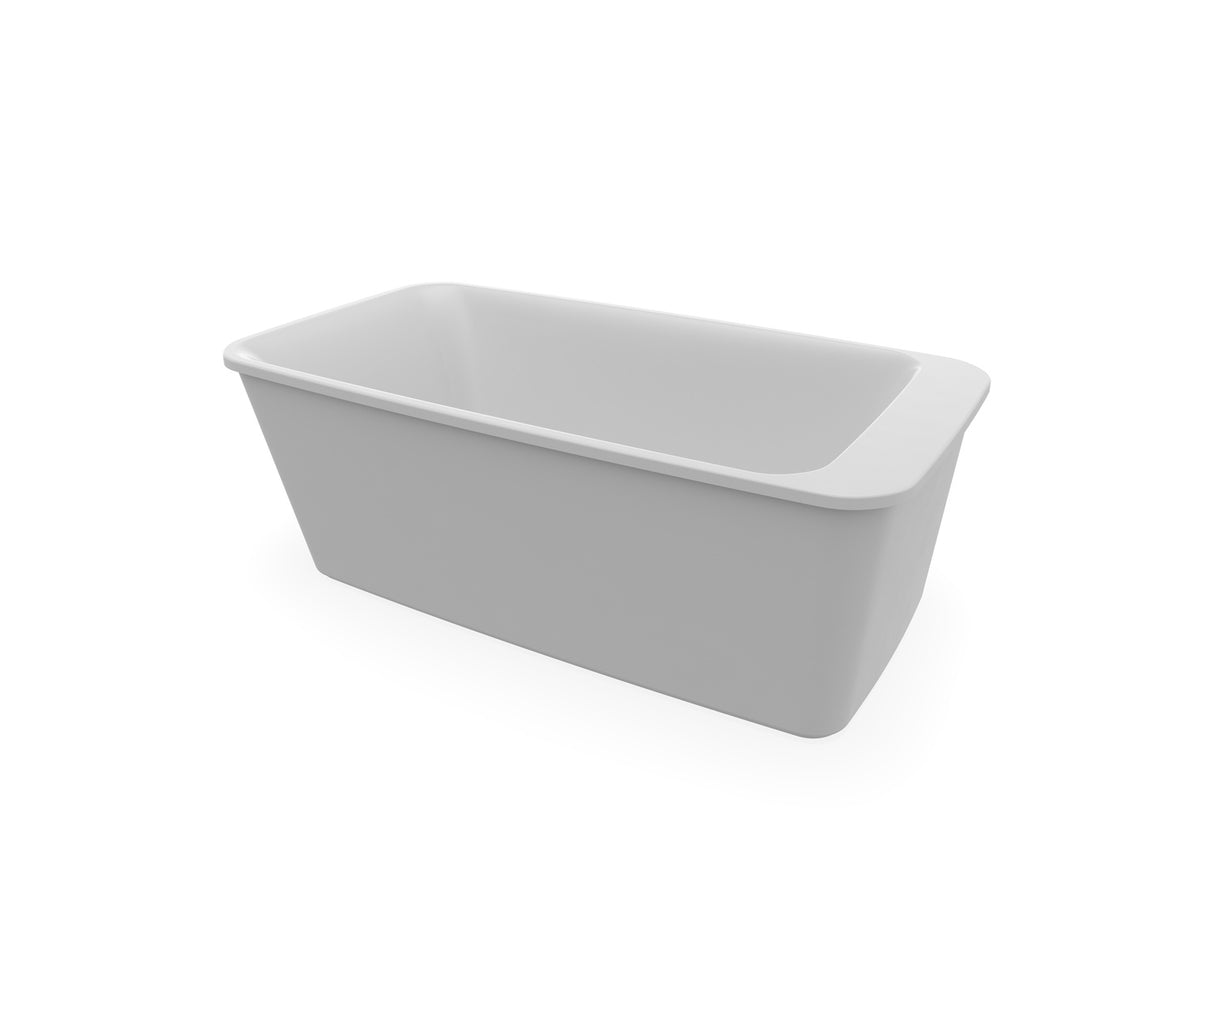 MAAX 105798-000-001-106 Lounge AcrylX Freestanding End Drain Bathtub in White with Sterling Silver Skirt